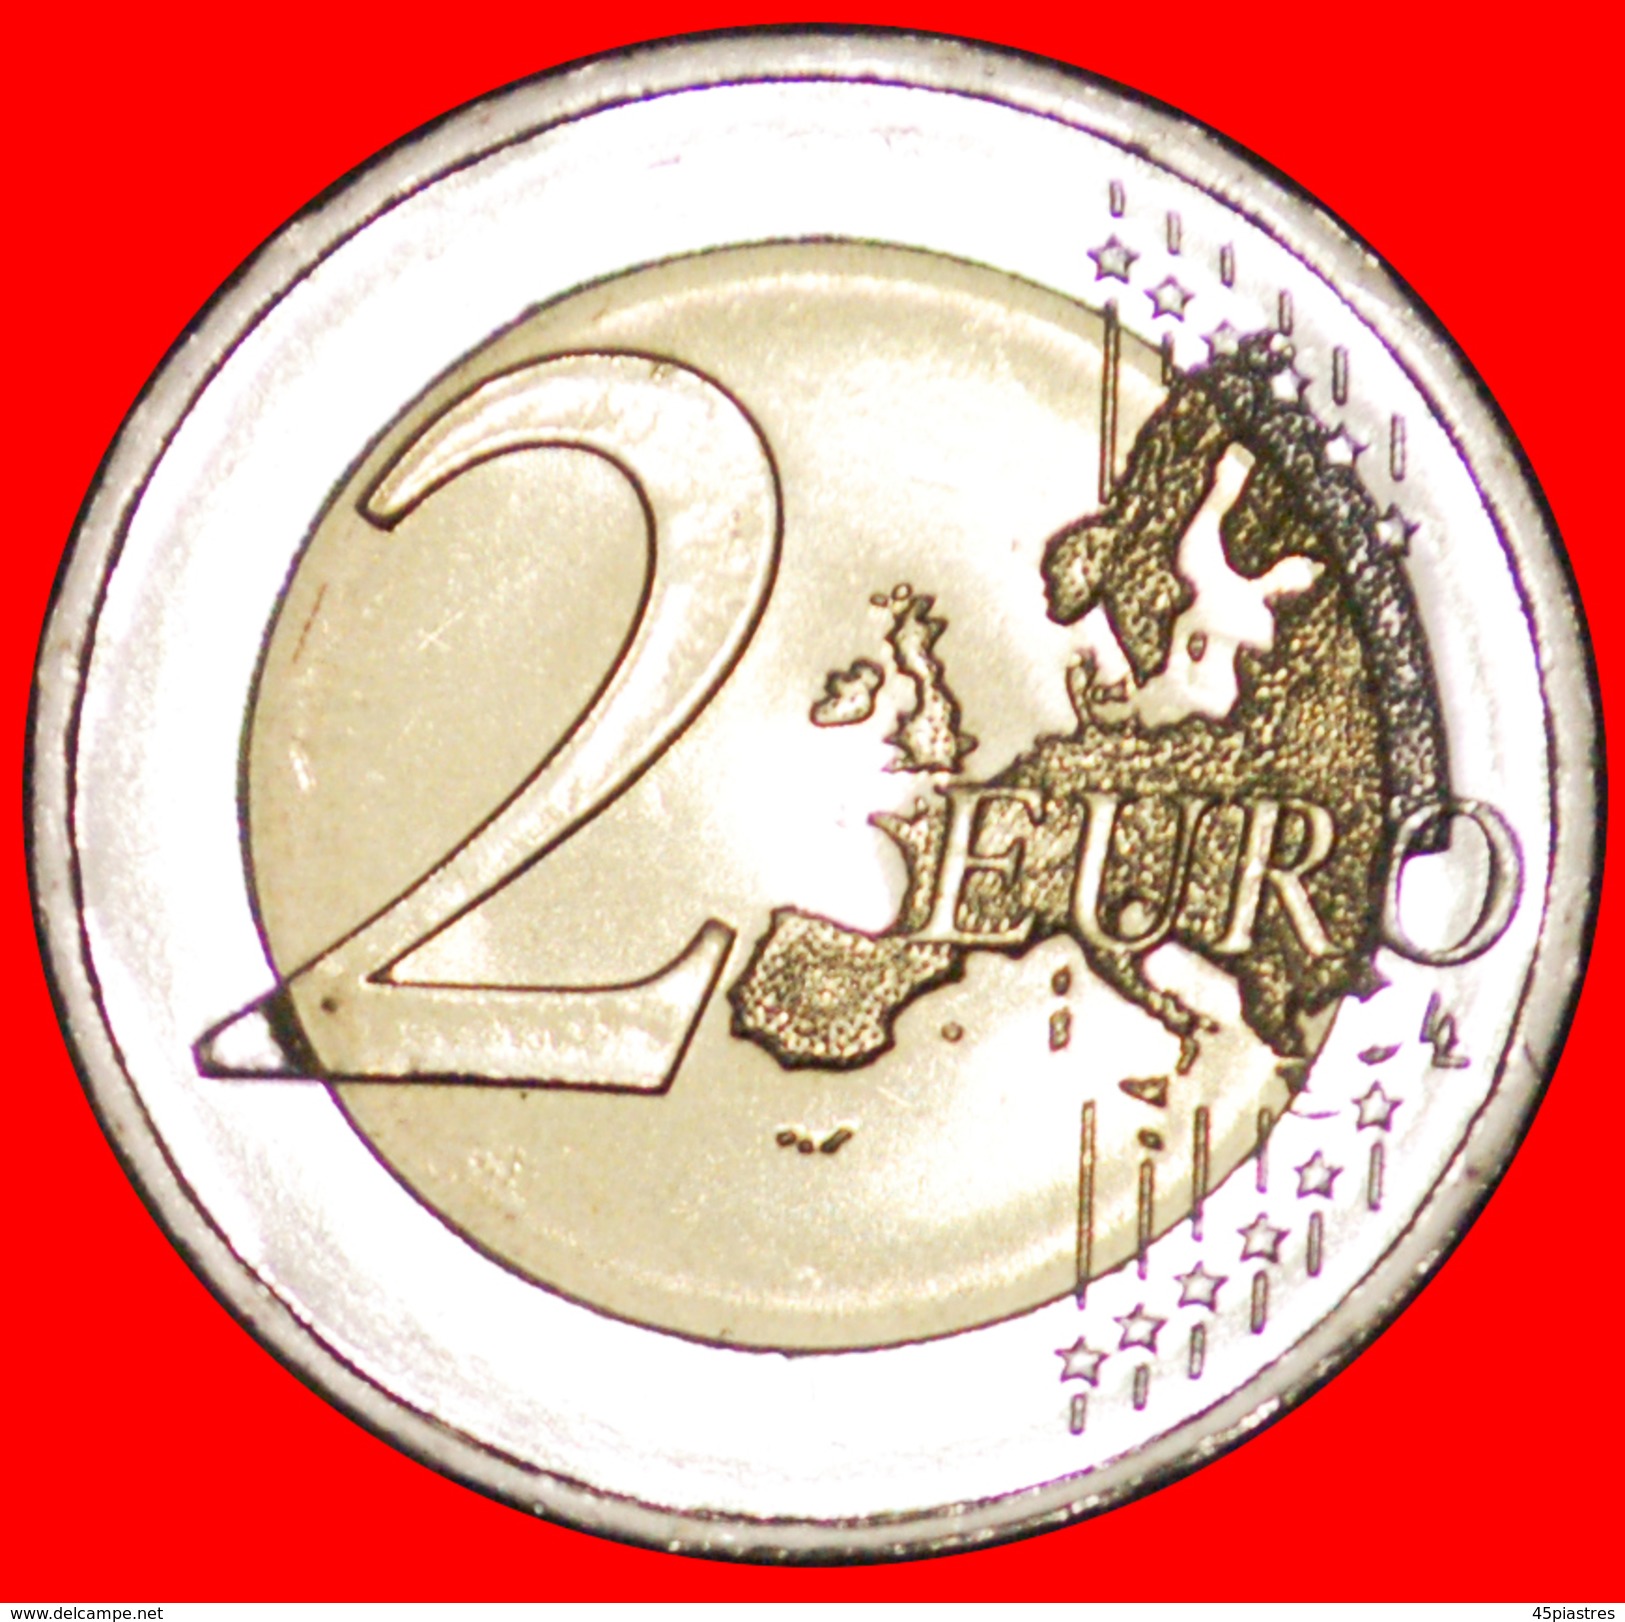 * GREECE: CYPRUS, CHYPRE, ZYPERN 2 € Common Commemorative Euro Coin 2017 UNC PAPHOS! LOW START ★ NO RESERVE! - Chypre